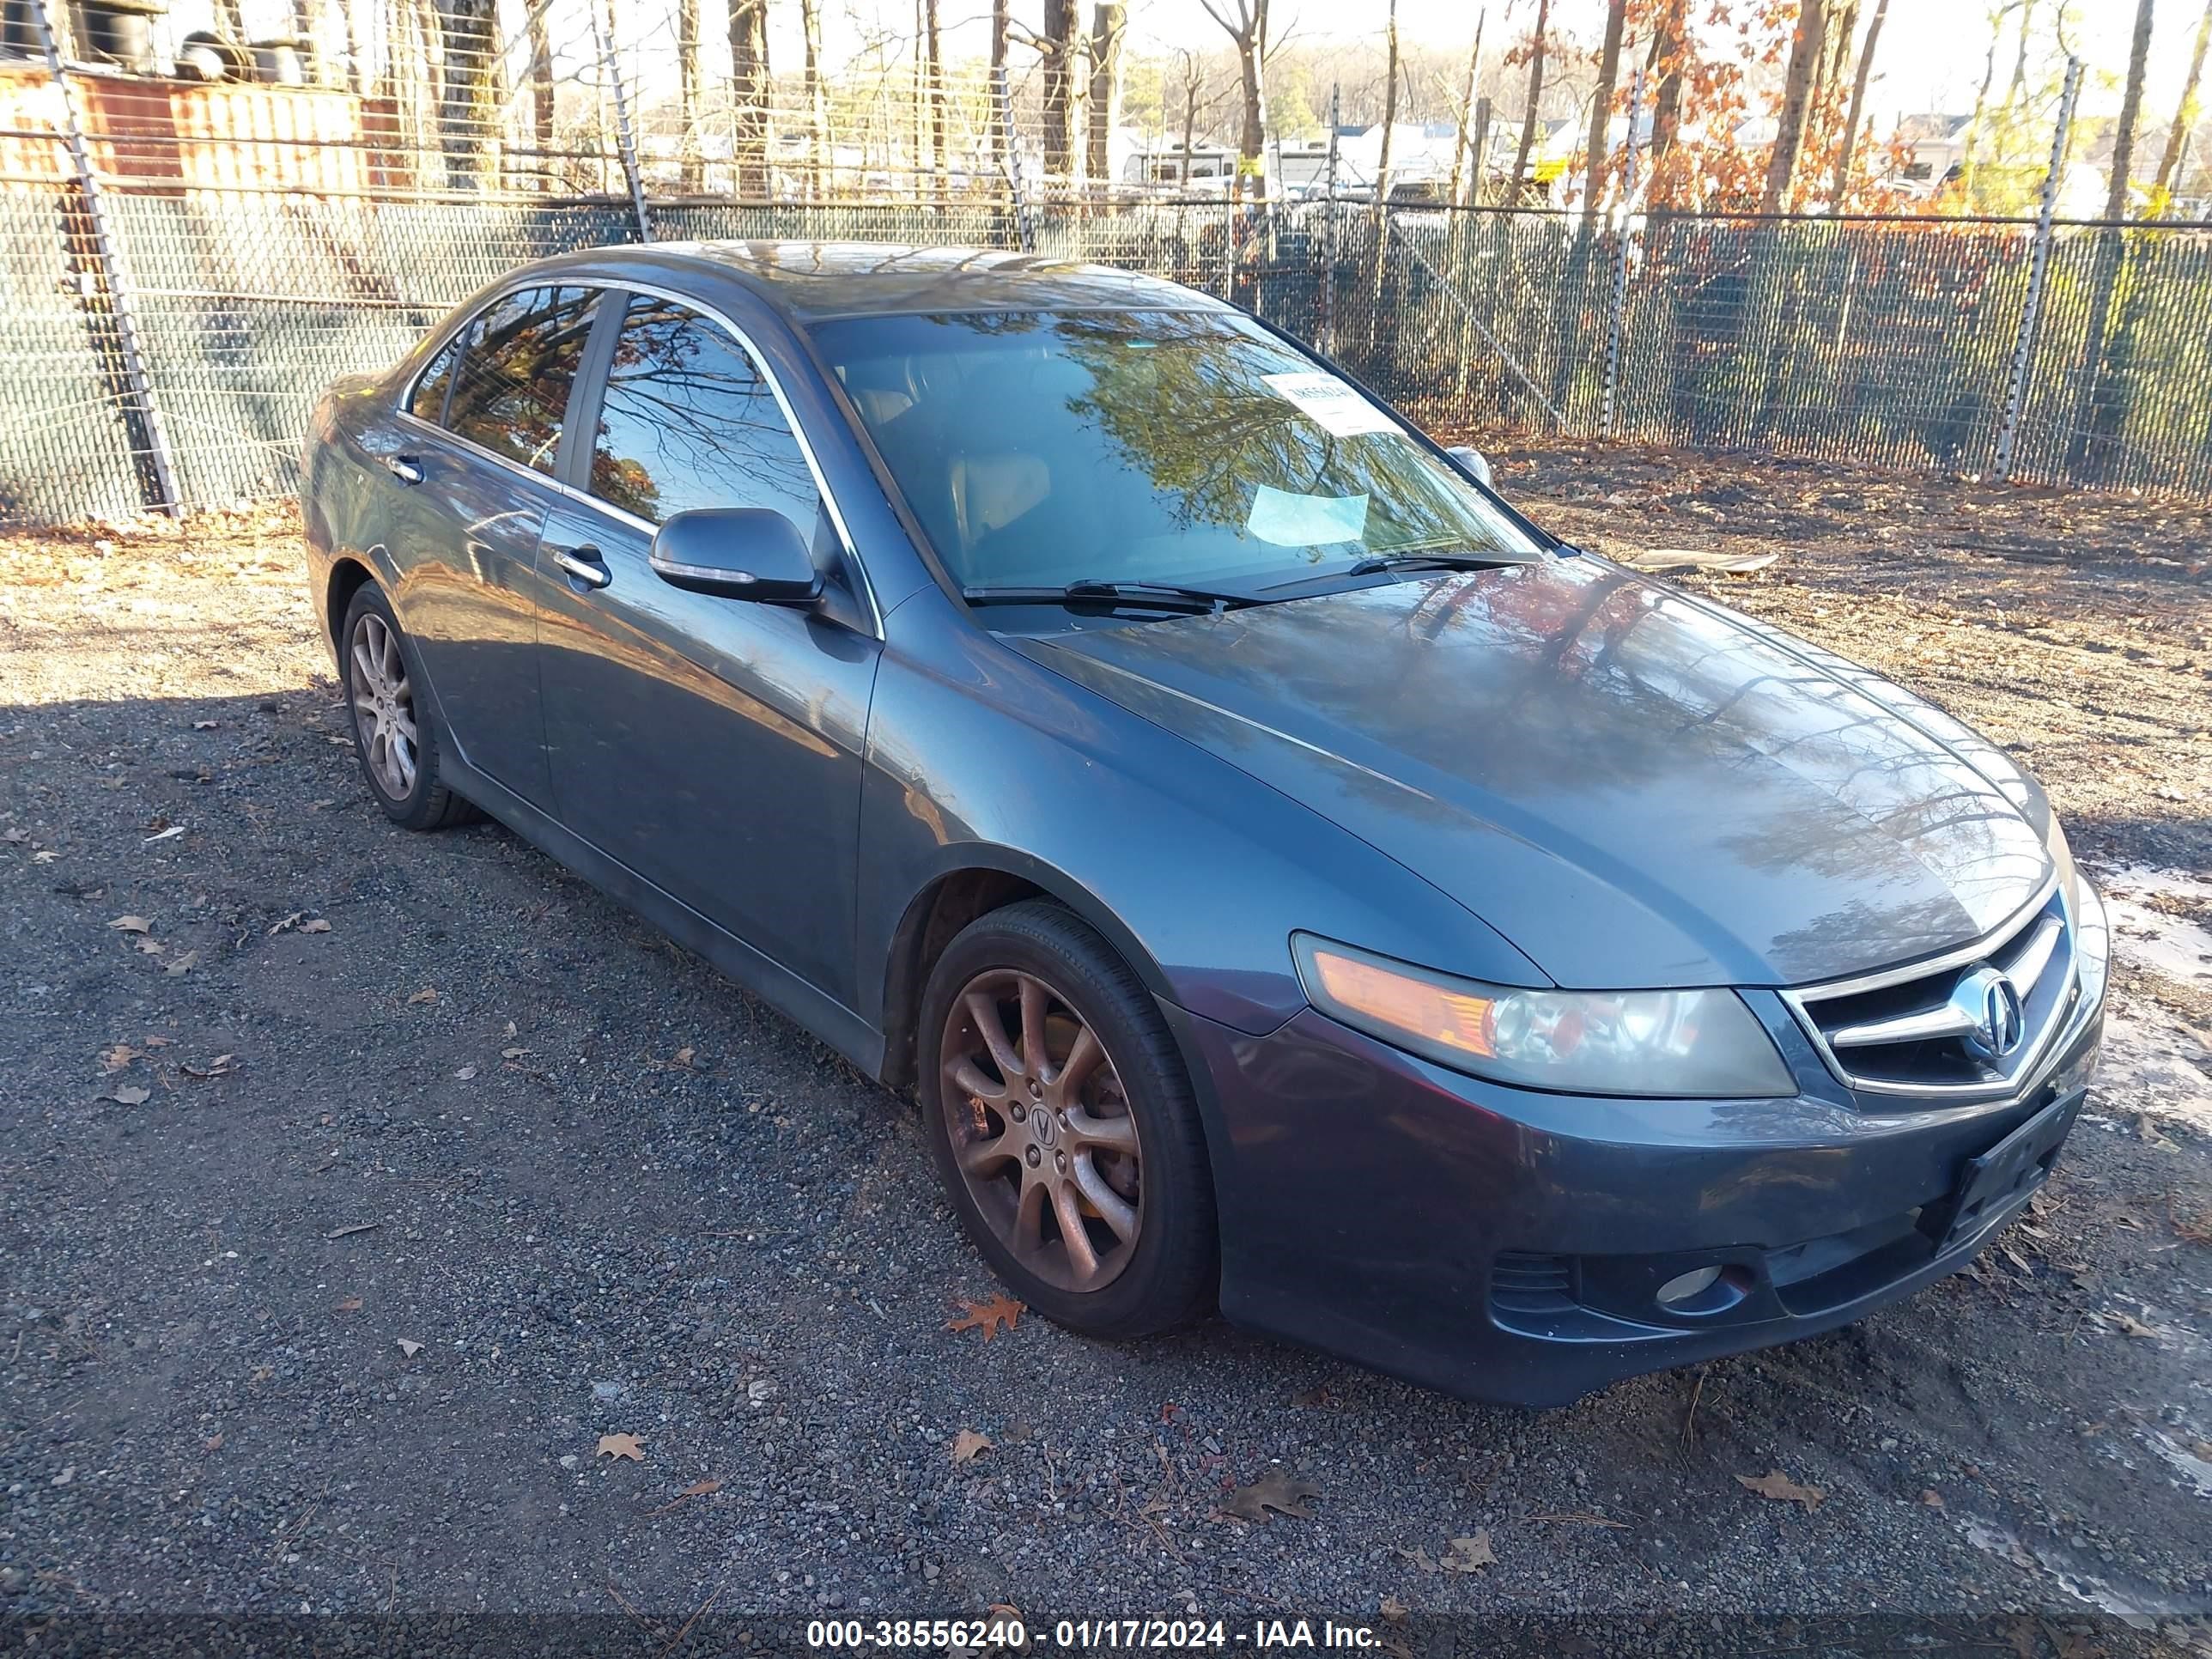 vin: JH4CL96988C015837 JH4CL96988C015837 2008 acura tsx 2400 for Sale in 23693, 211 Production Dr, Yorktown, Virginia, USA